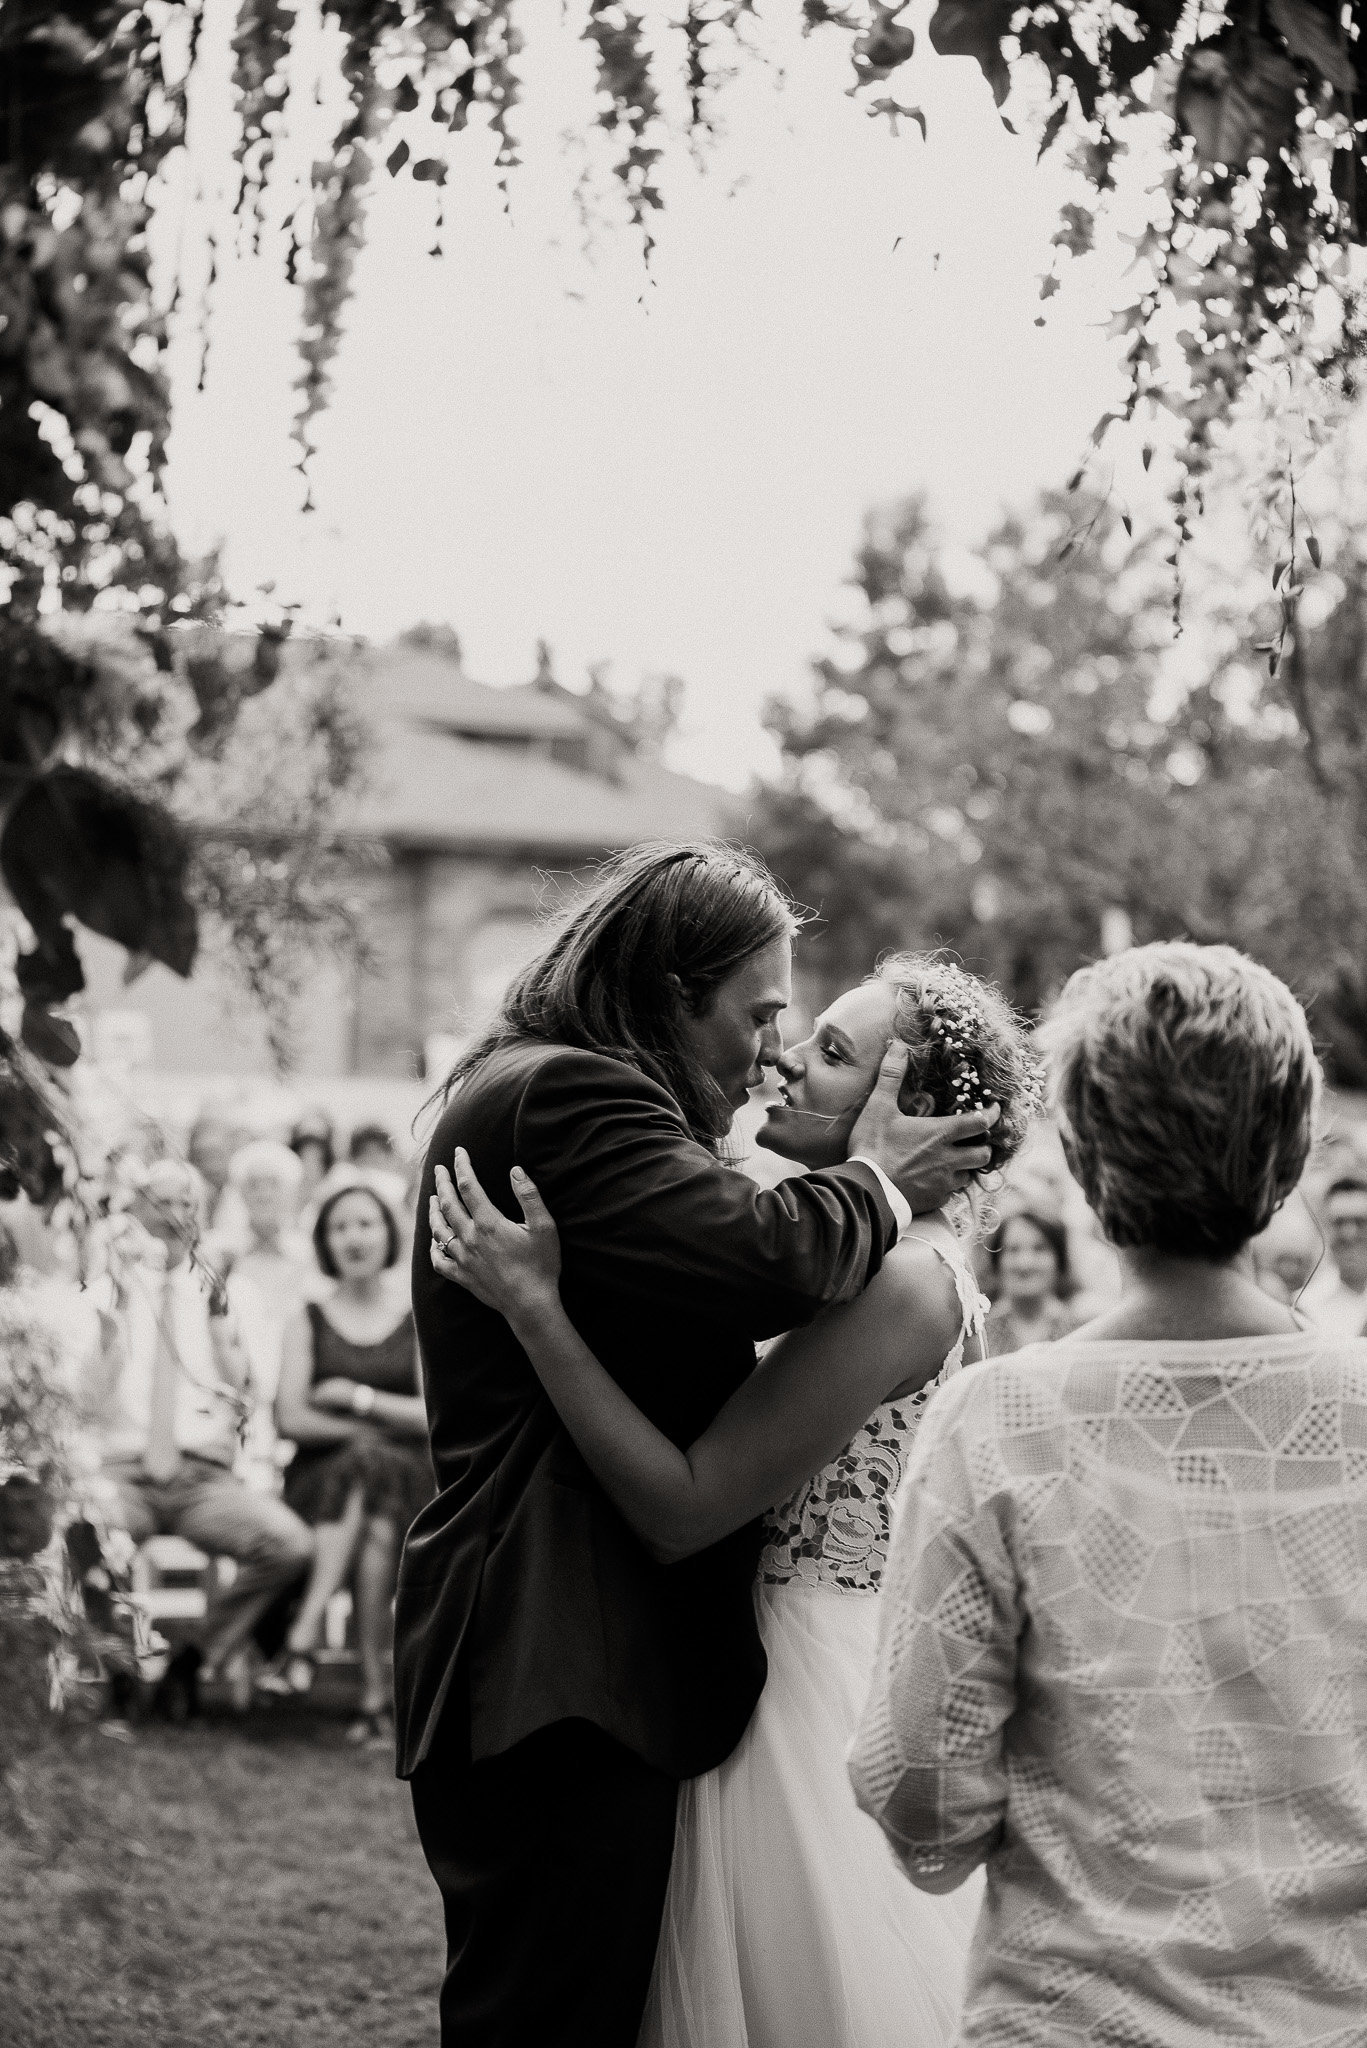 first kiss in black and white at a wedding in Casper Wyoming.